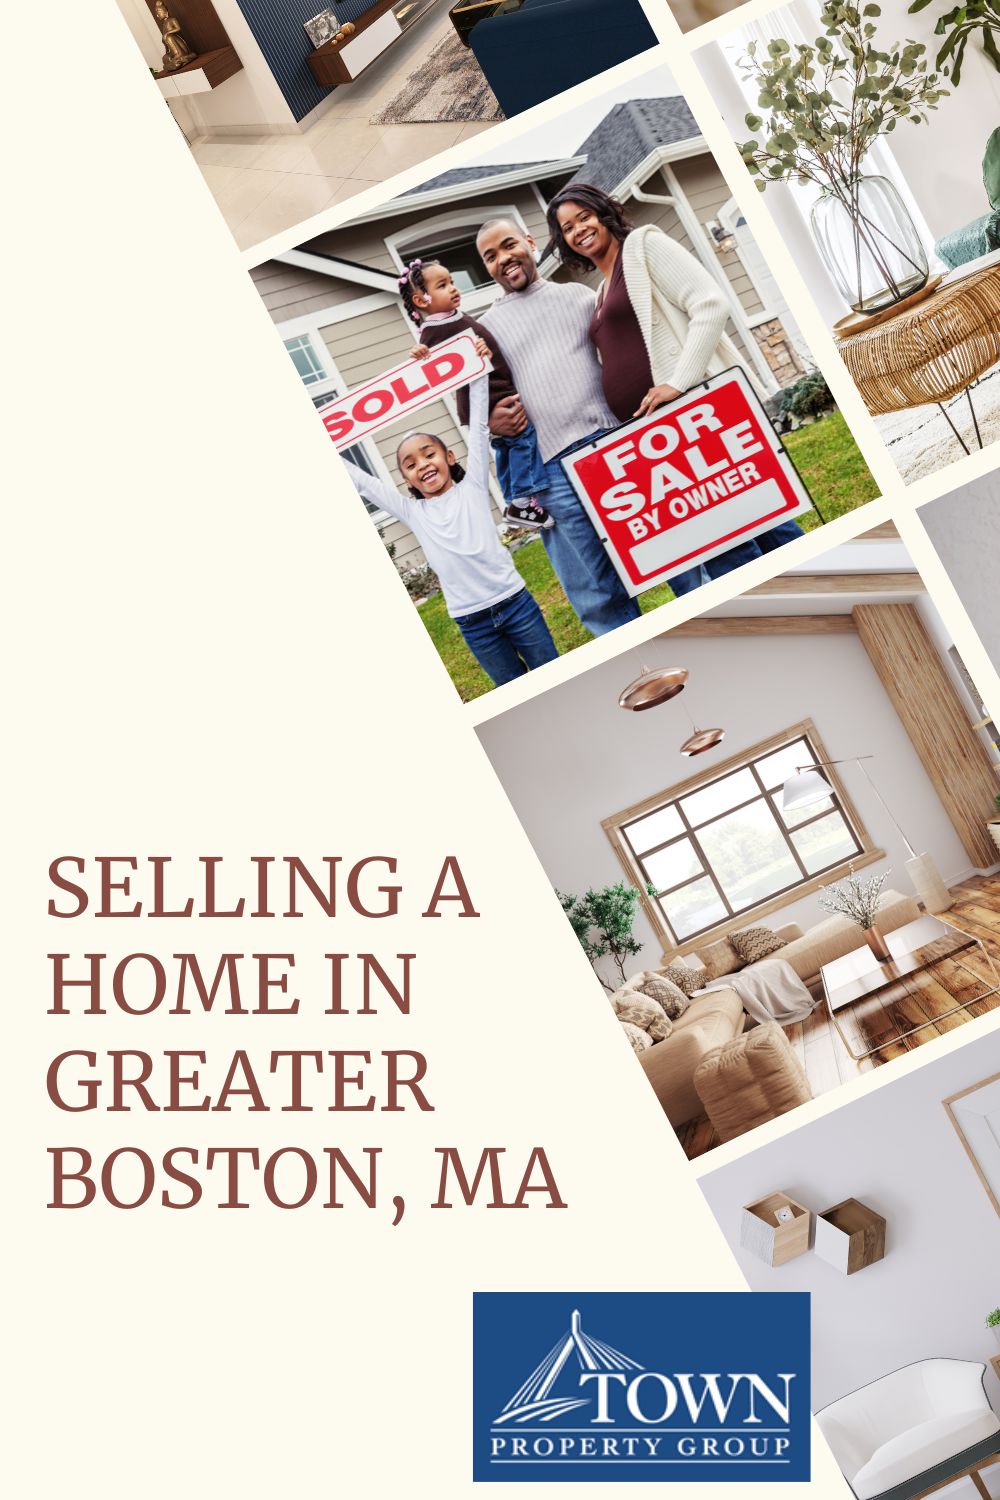 Selling a Home in Greater Boston, MA